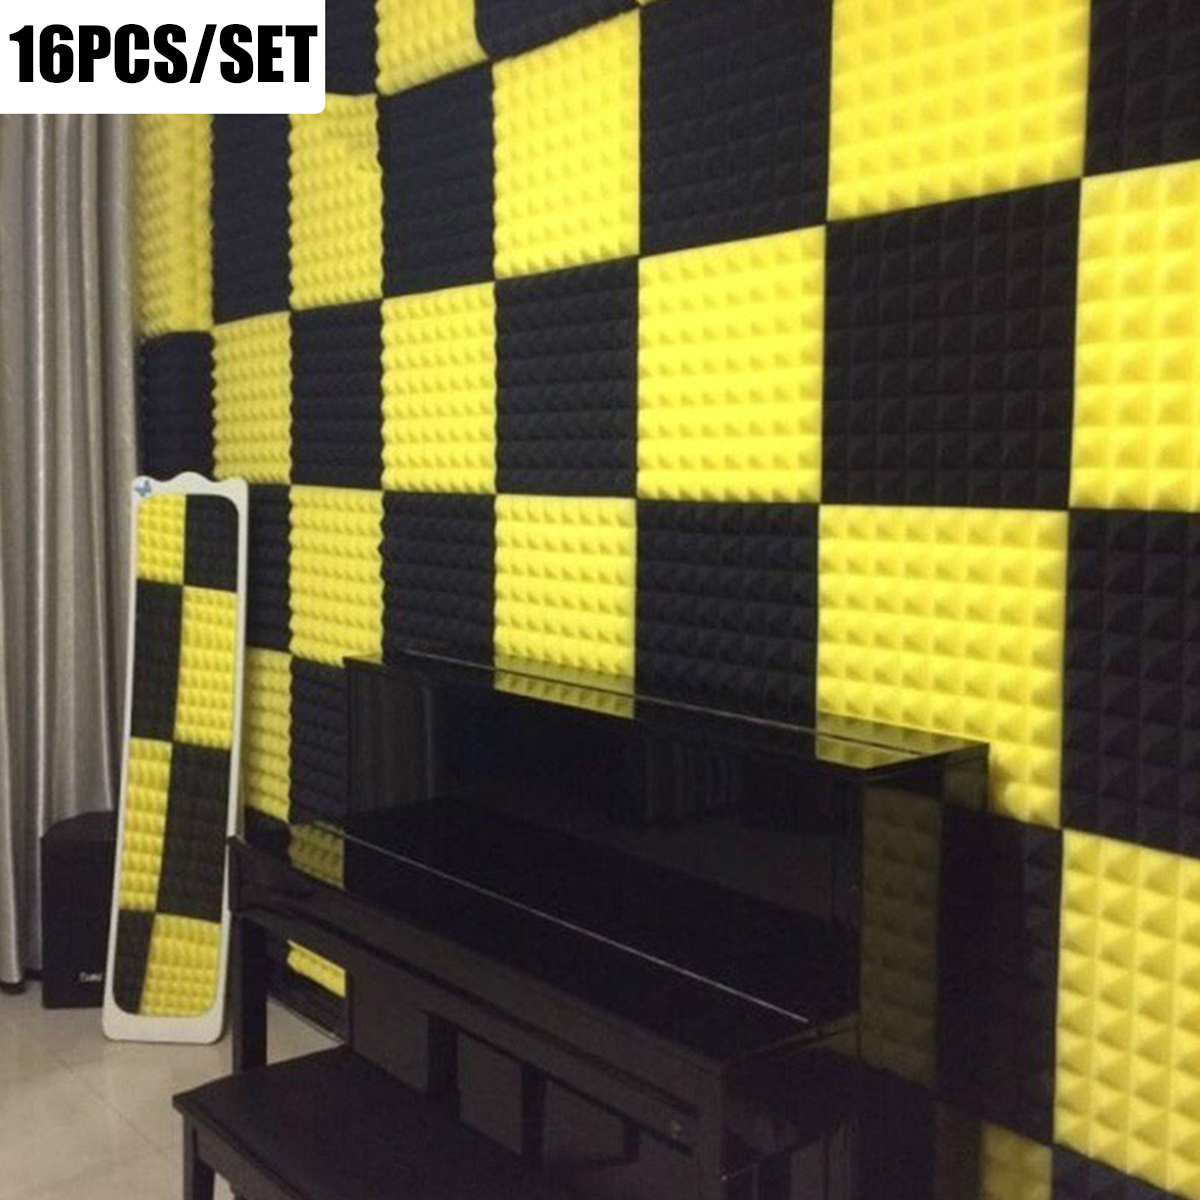 16-Pcs-Soundproofing-Wedges-Acoustic-Panels-Tiles-Insulation-Closed-Cell-Foams-1737781-3